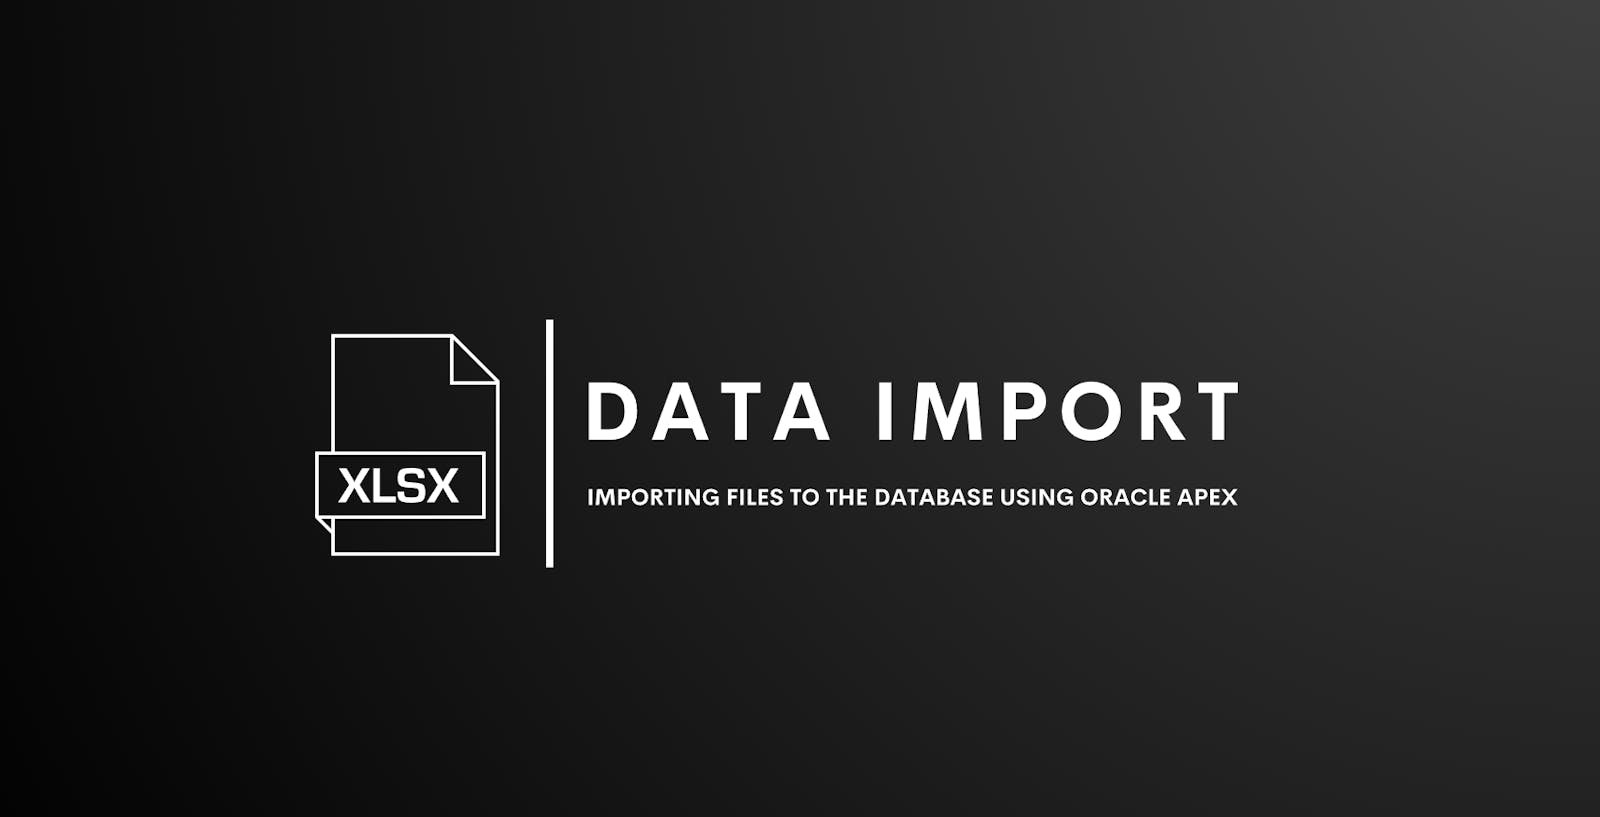 Importing files (XLSX, CSV, XML & JSON) to the database using Oracle APEX